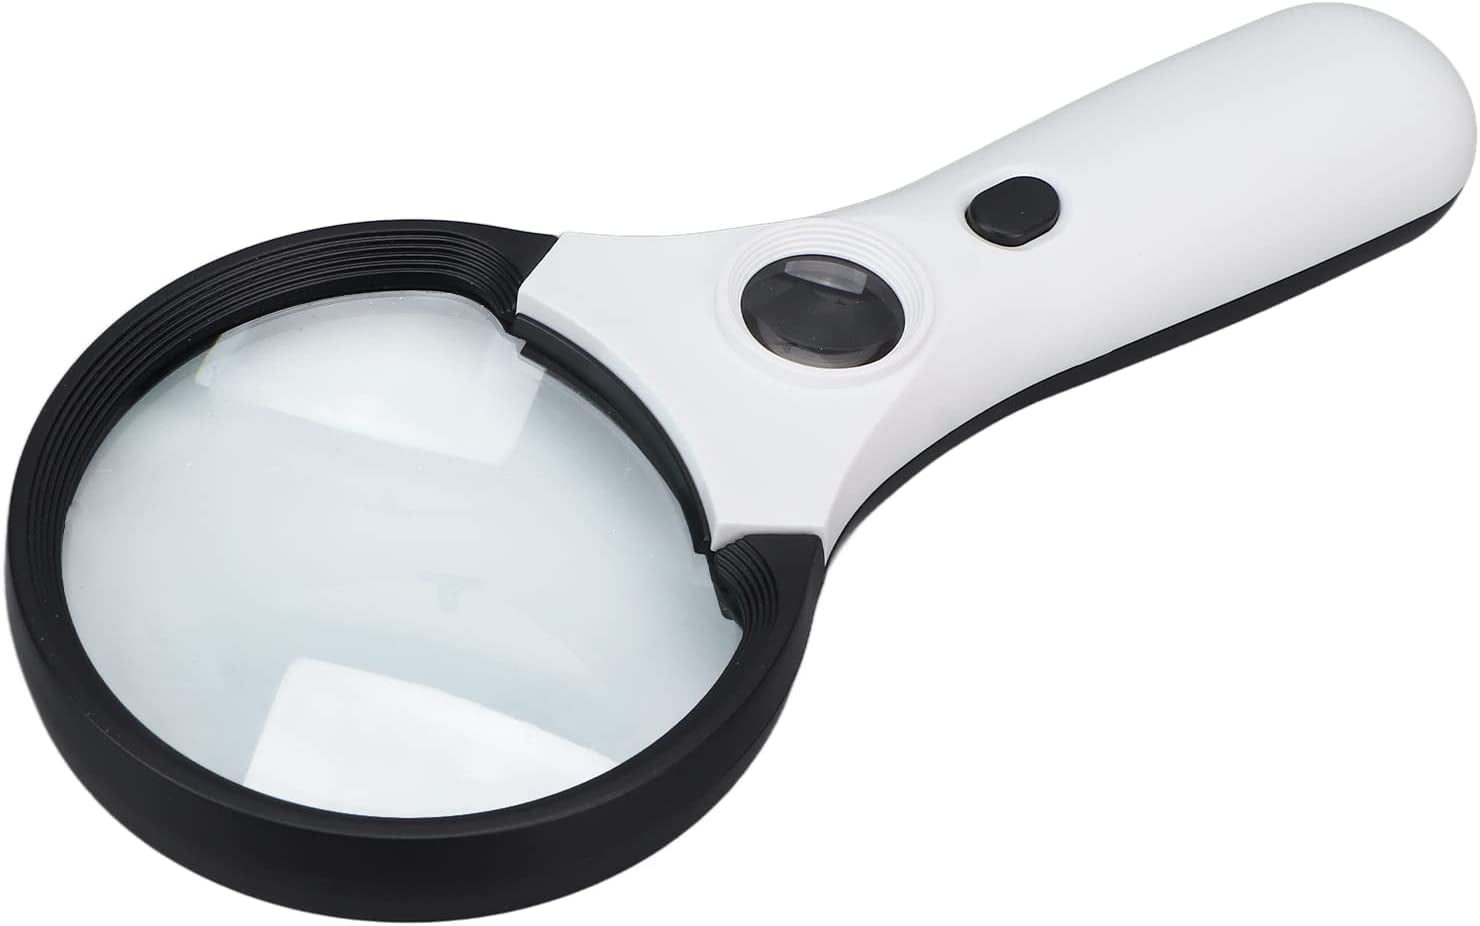 Large Magnifying Glass with Light, 10x 25x 45x Handheld Illuminated Magnifier with 3 Light Modes, 12 LED Lights, Storage Bag, Clean Cloth for